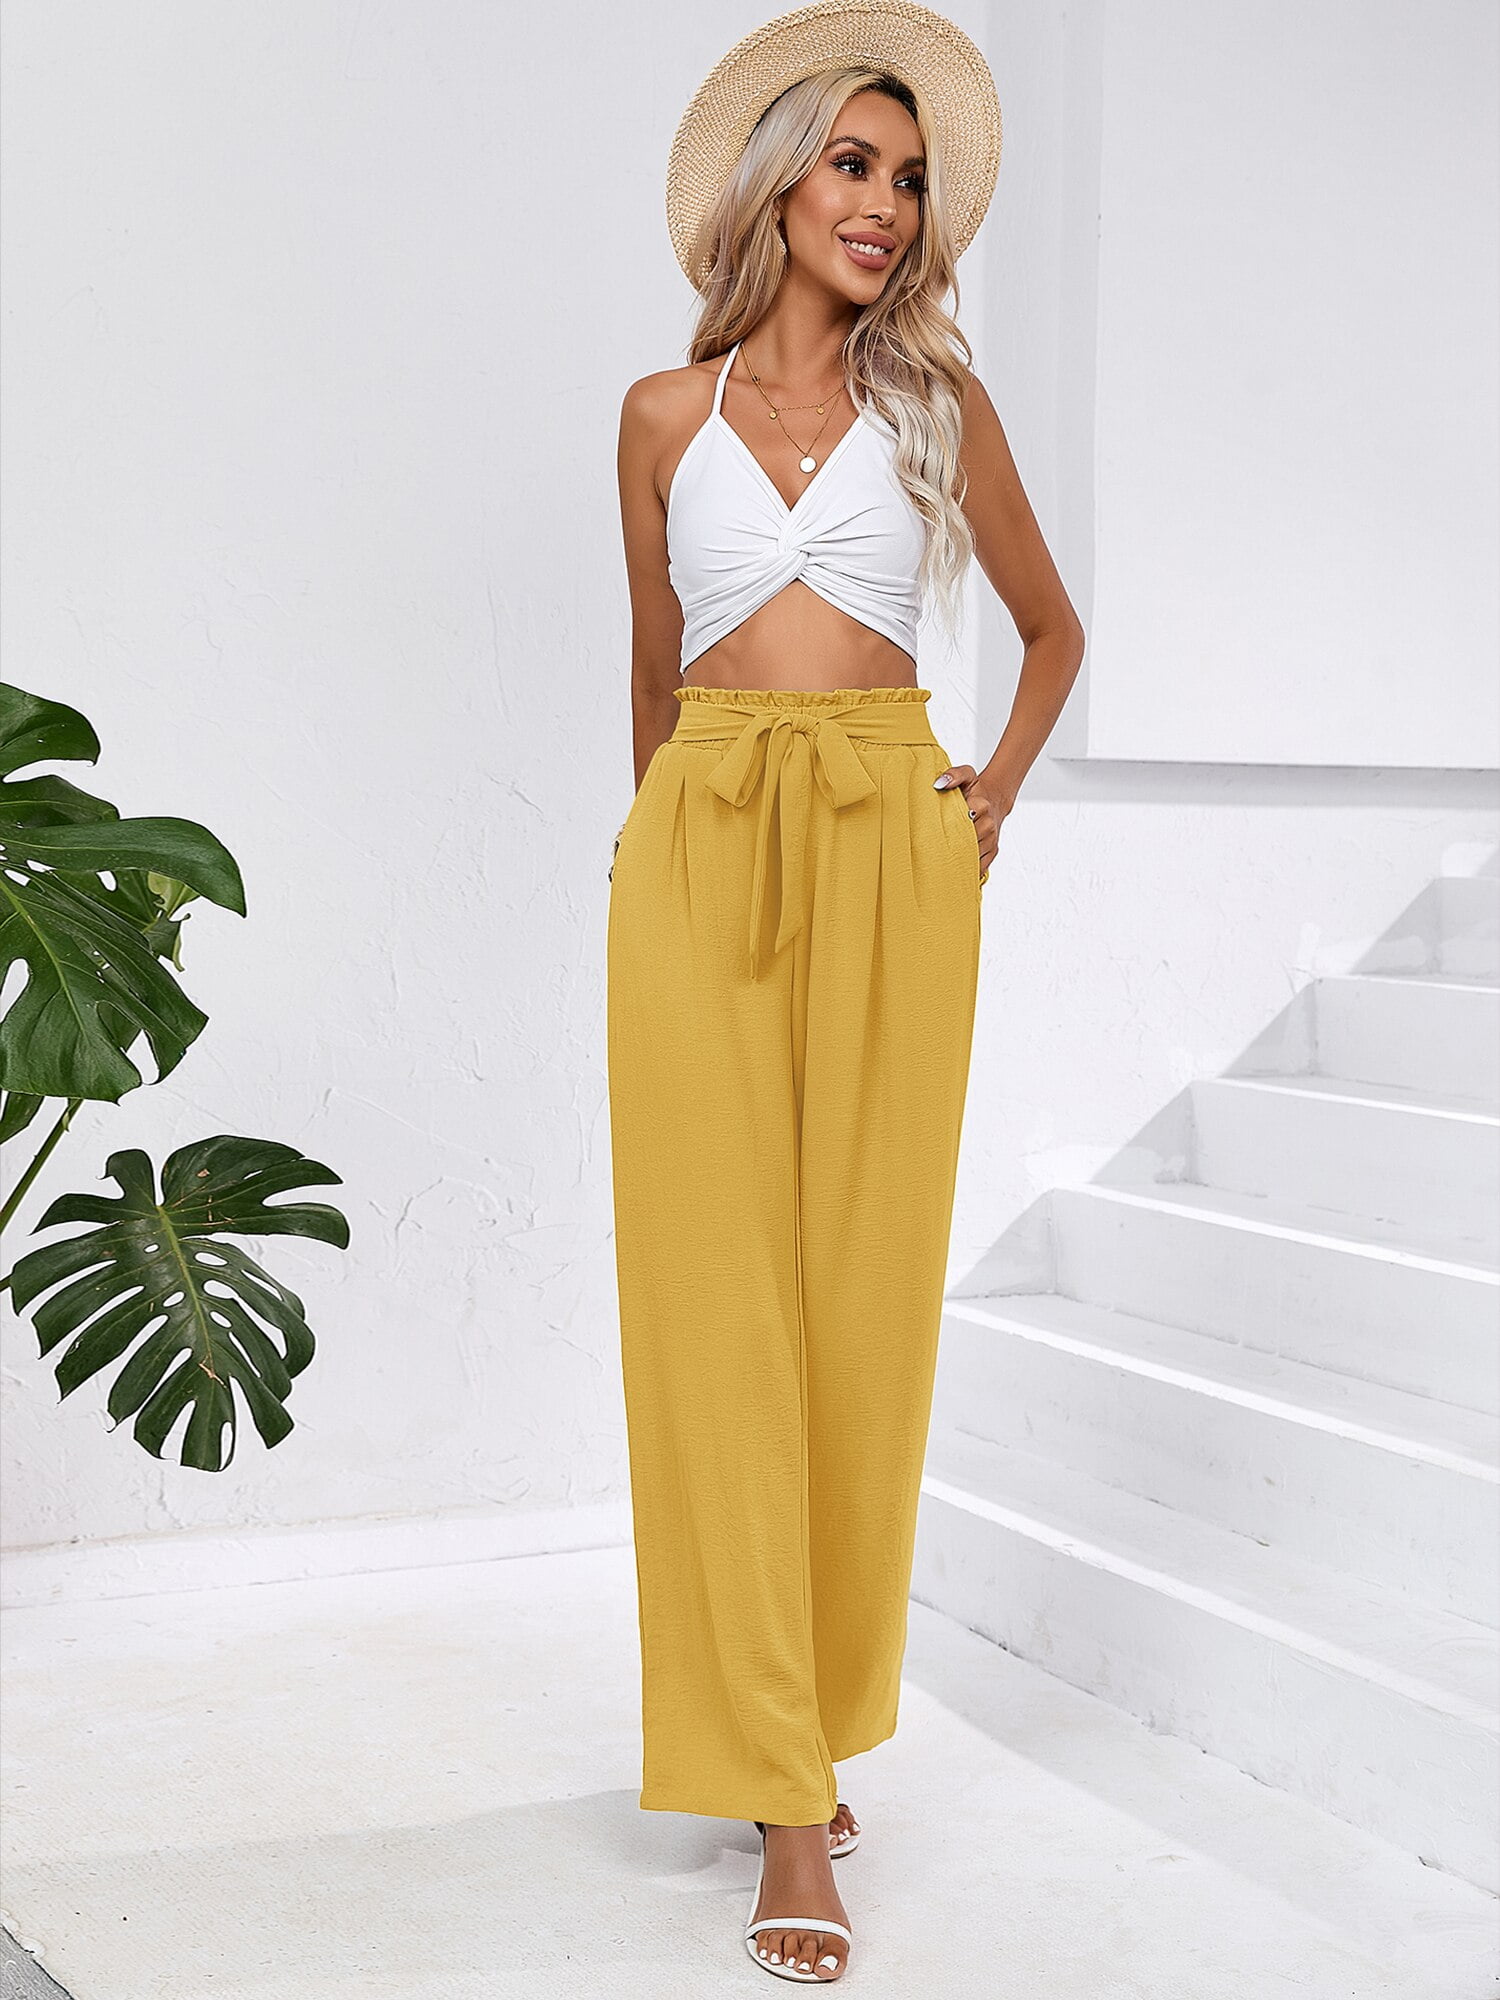 BUTTER SOFT HEATHER GREY PALAZZO PANT SET *BACK IN STOCK* – L'ABEYE